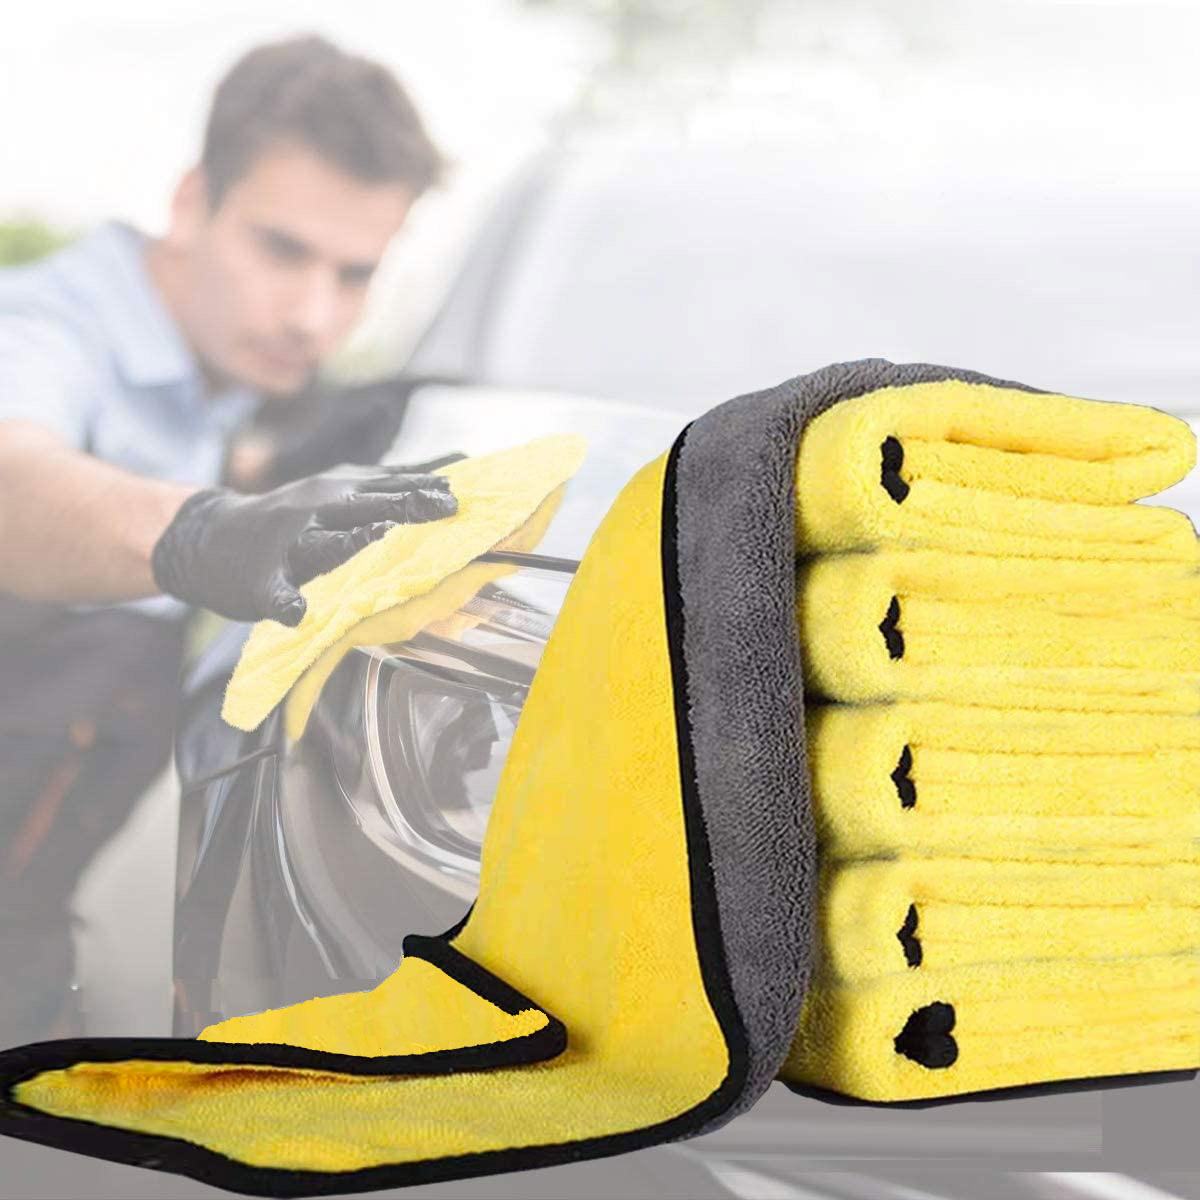 How to get a perfect microfiber towel for car detailing?